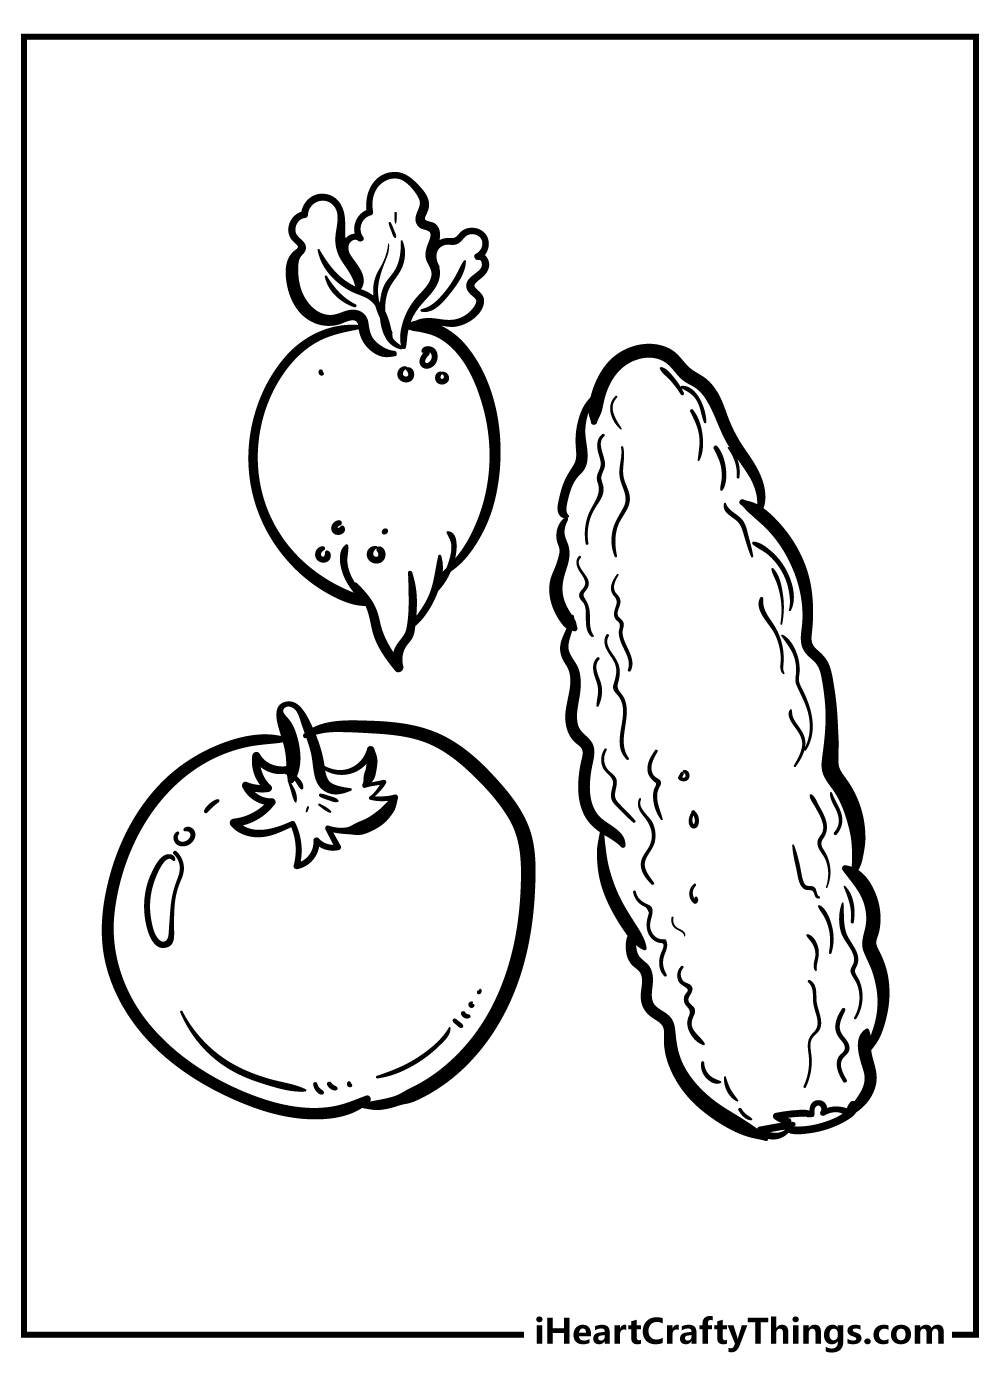 Vegetables Coloring Pages for kids free download